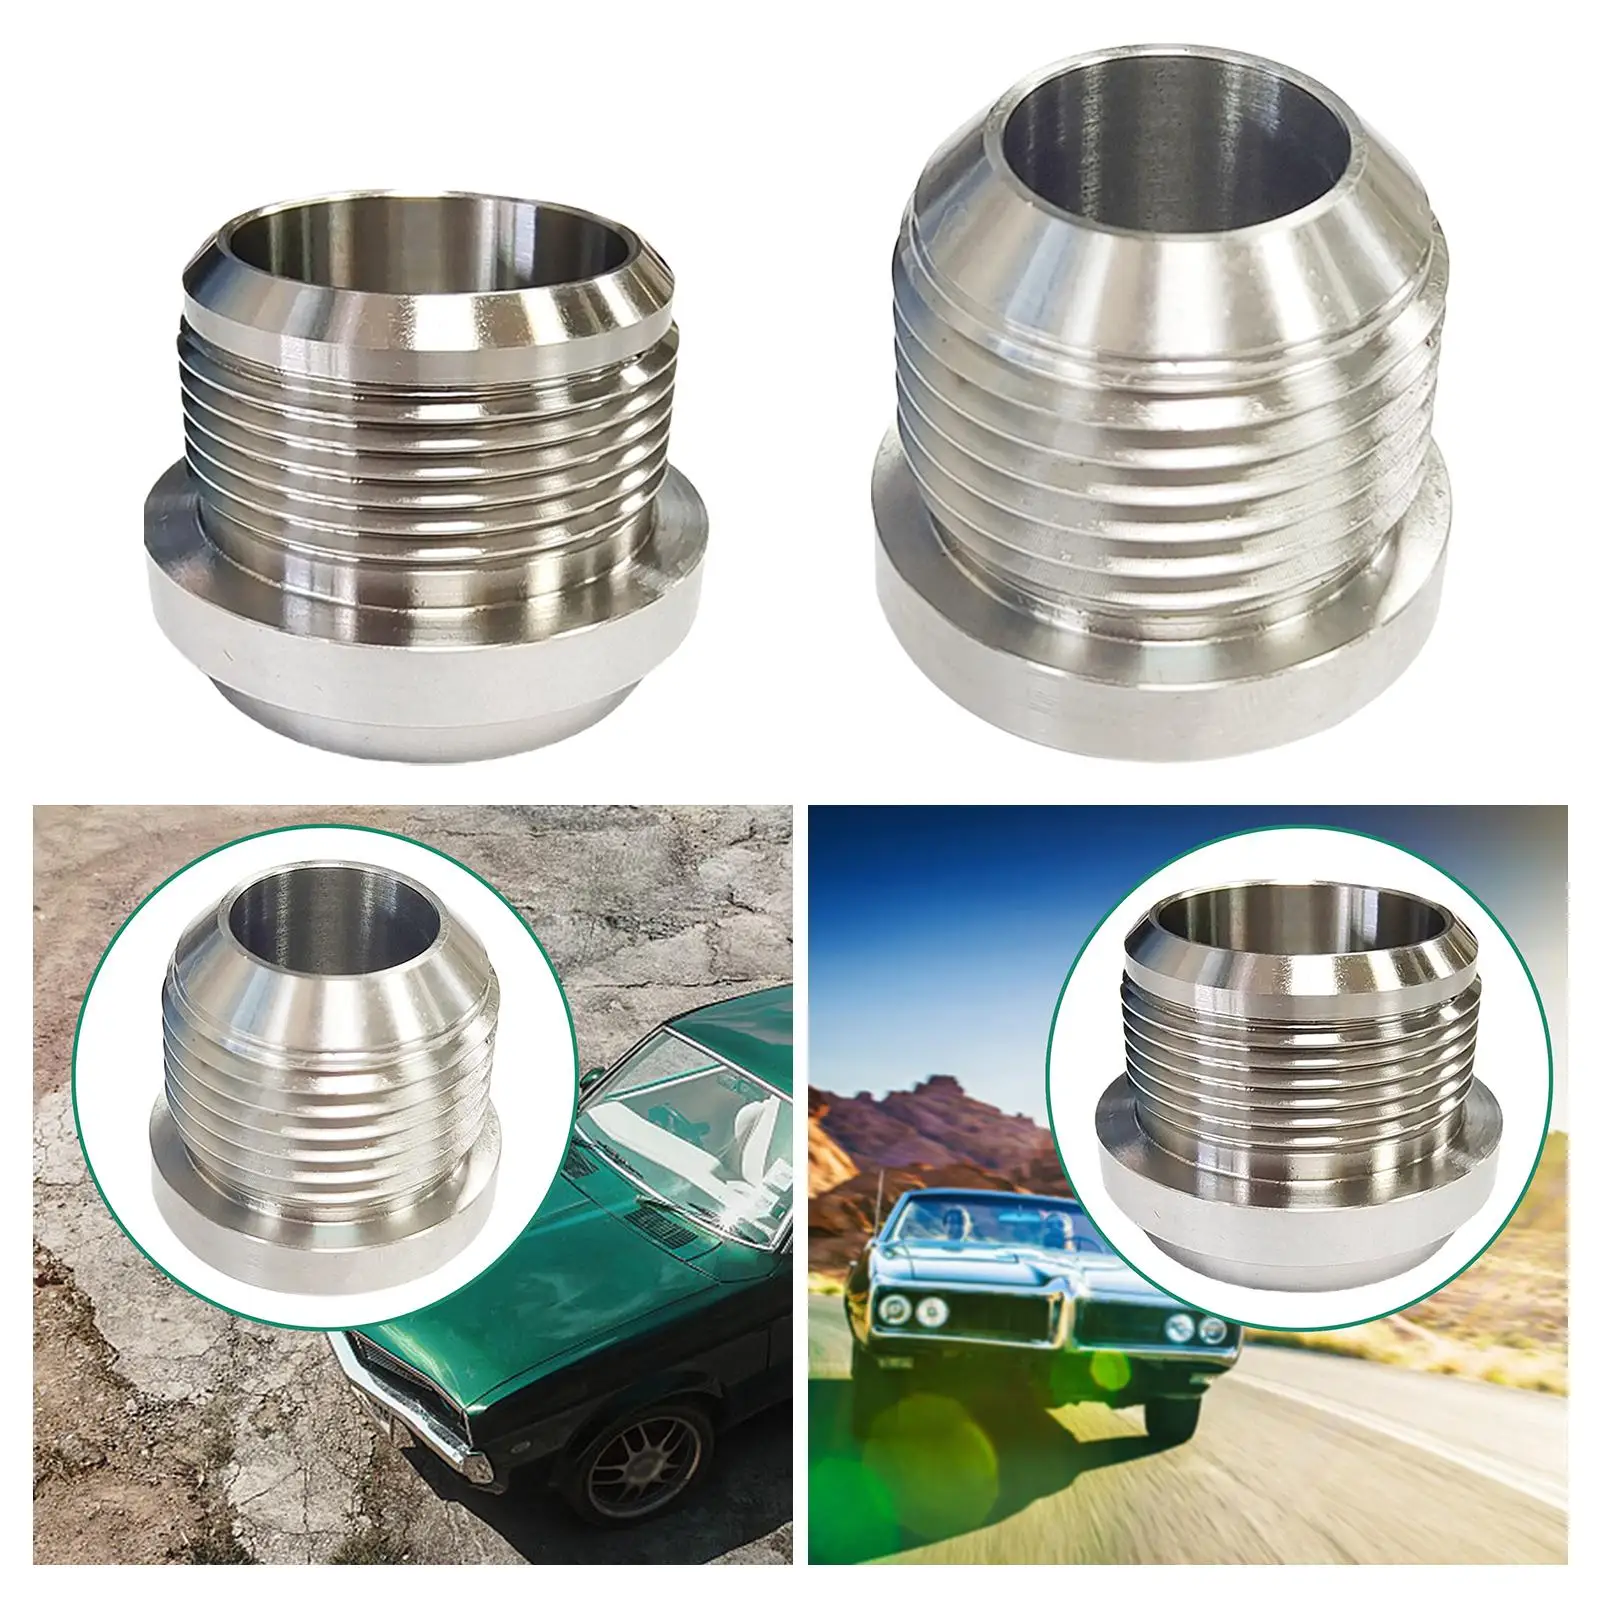 Stainless Steel Male Weld on Fitting Assembly Easy to Install Fuel Oil Coolant Fluid Air Bare Male Billet Weldable Fitting